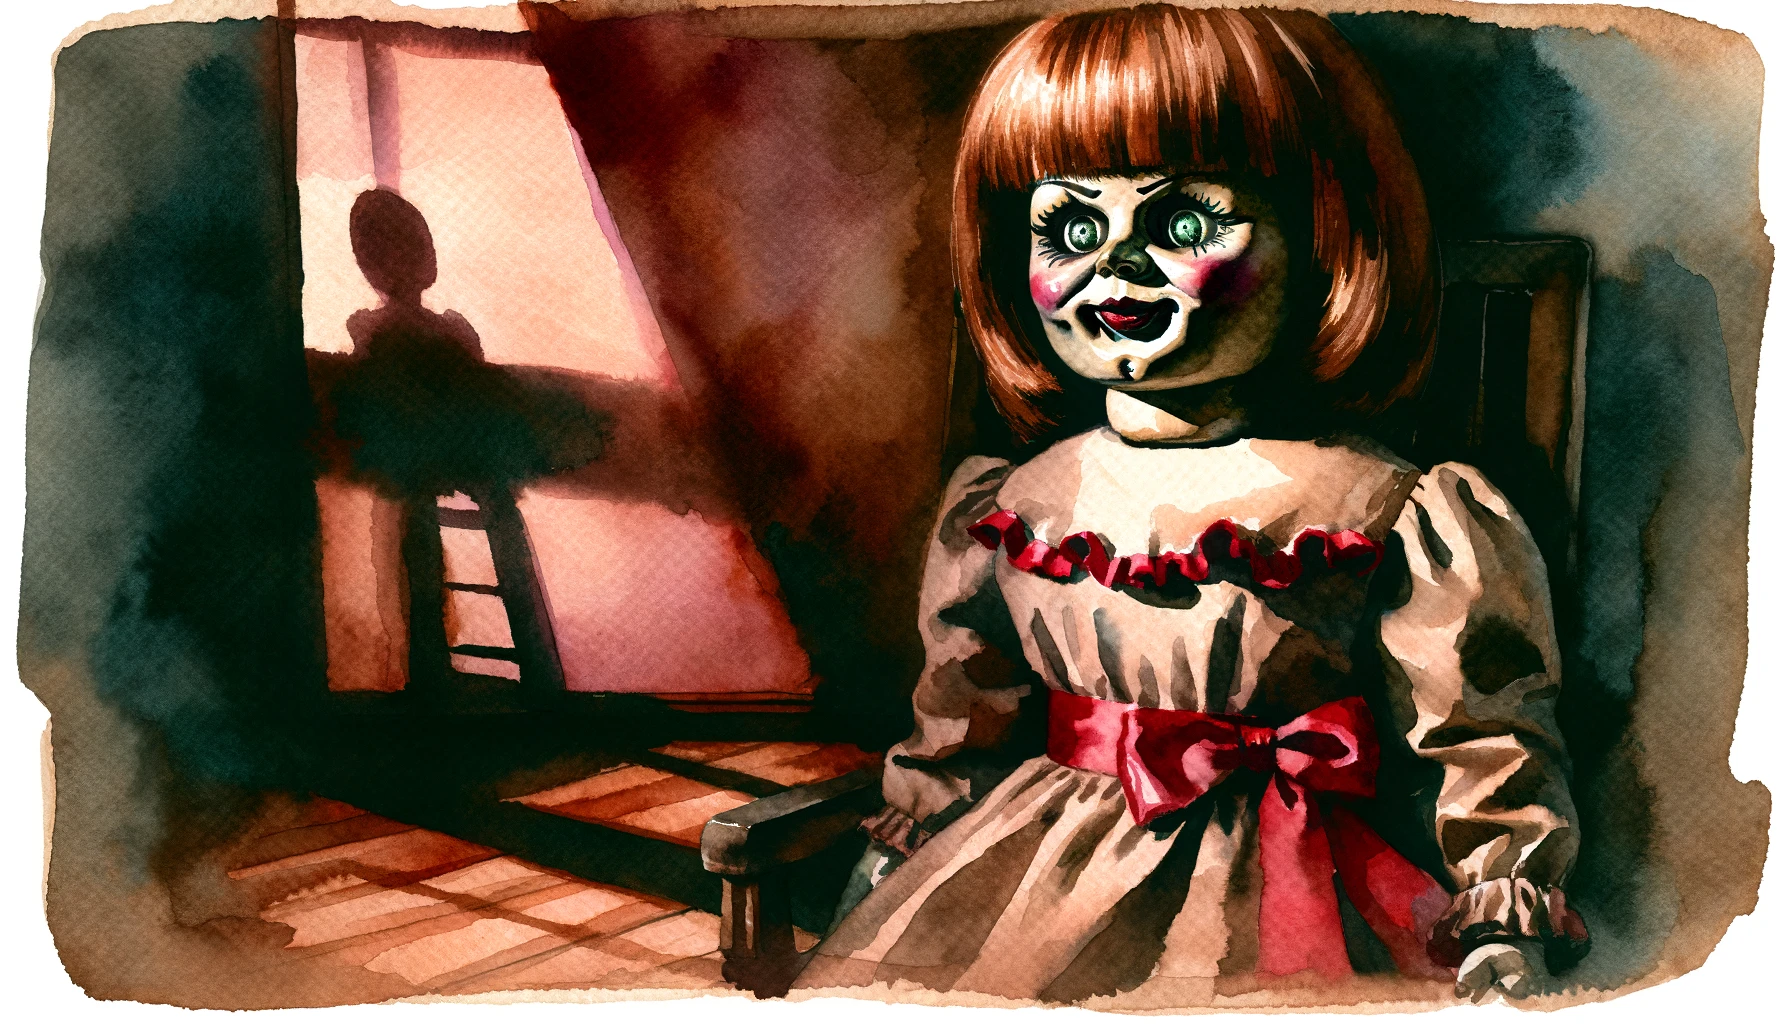 Cover image for movies like Annabelle, features a creepy Annabelle doll in a dark, red-tinted room.